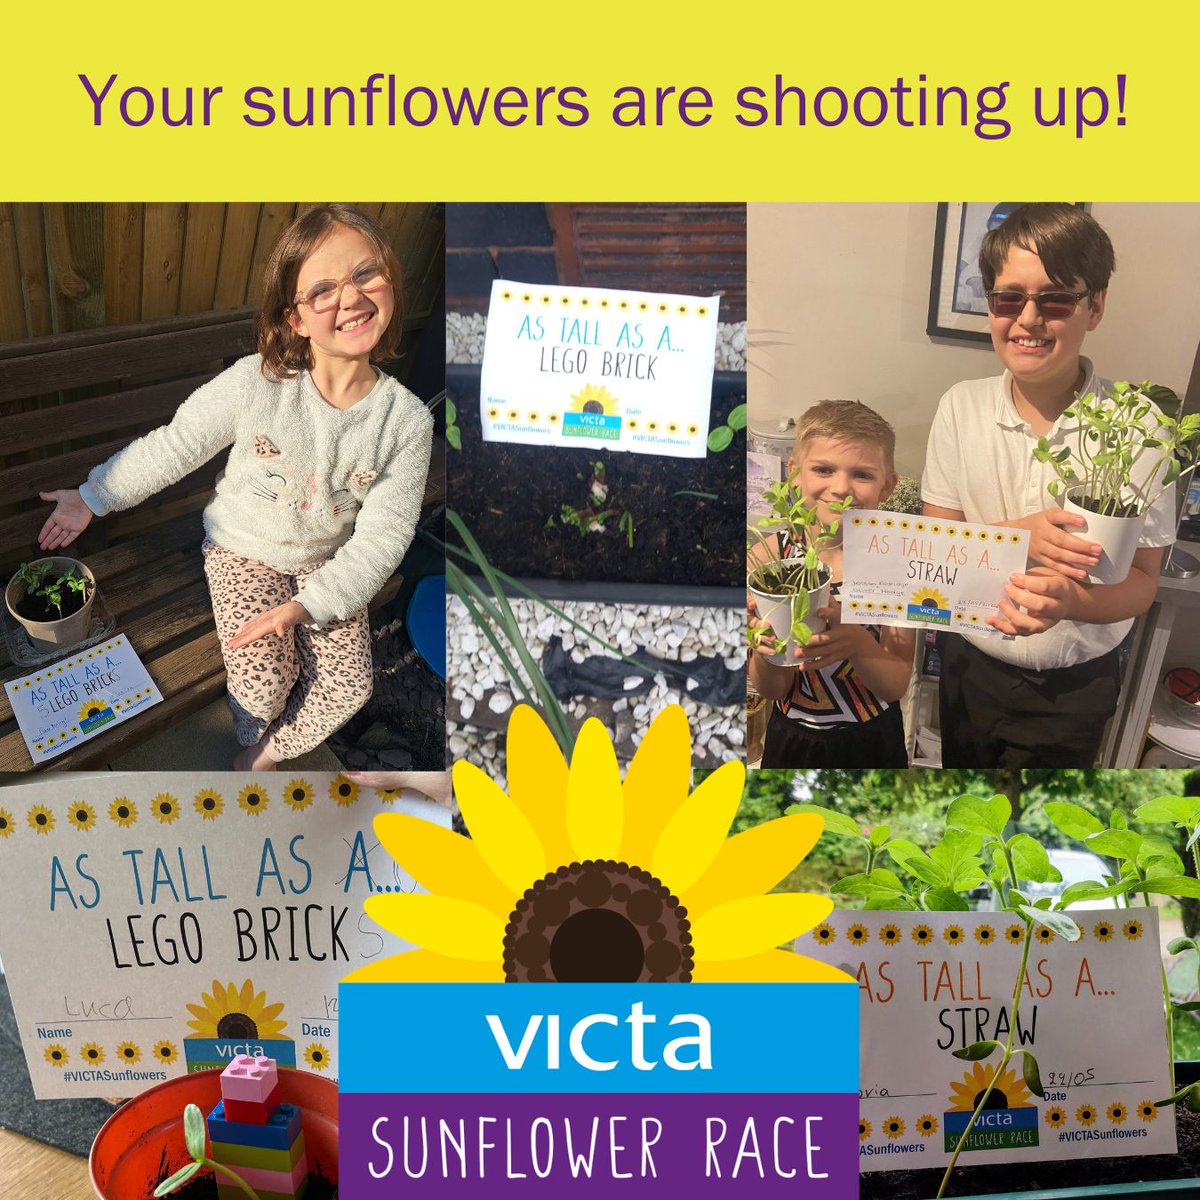 Wow! Congratulations to our sunflower race growers - your sunflowers have been really shooting up! Don't forget to share your photos to enter the race and view our sunflower gallery so far here: victa.org.uk/victa-sunflowe… #VICTASunflowers